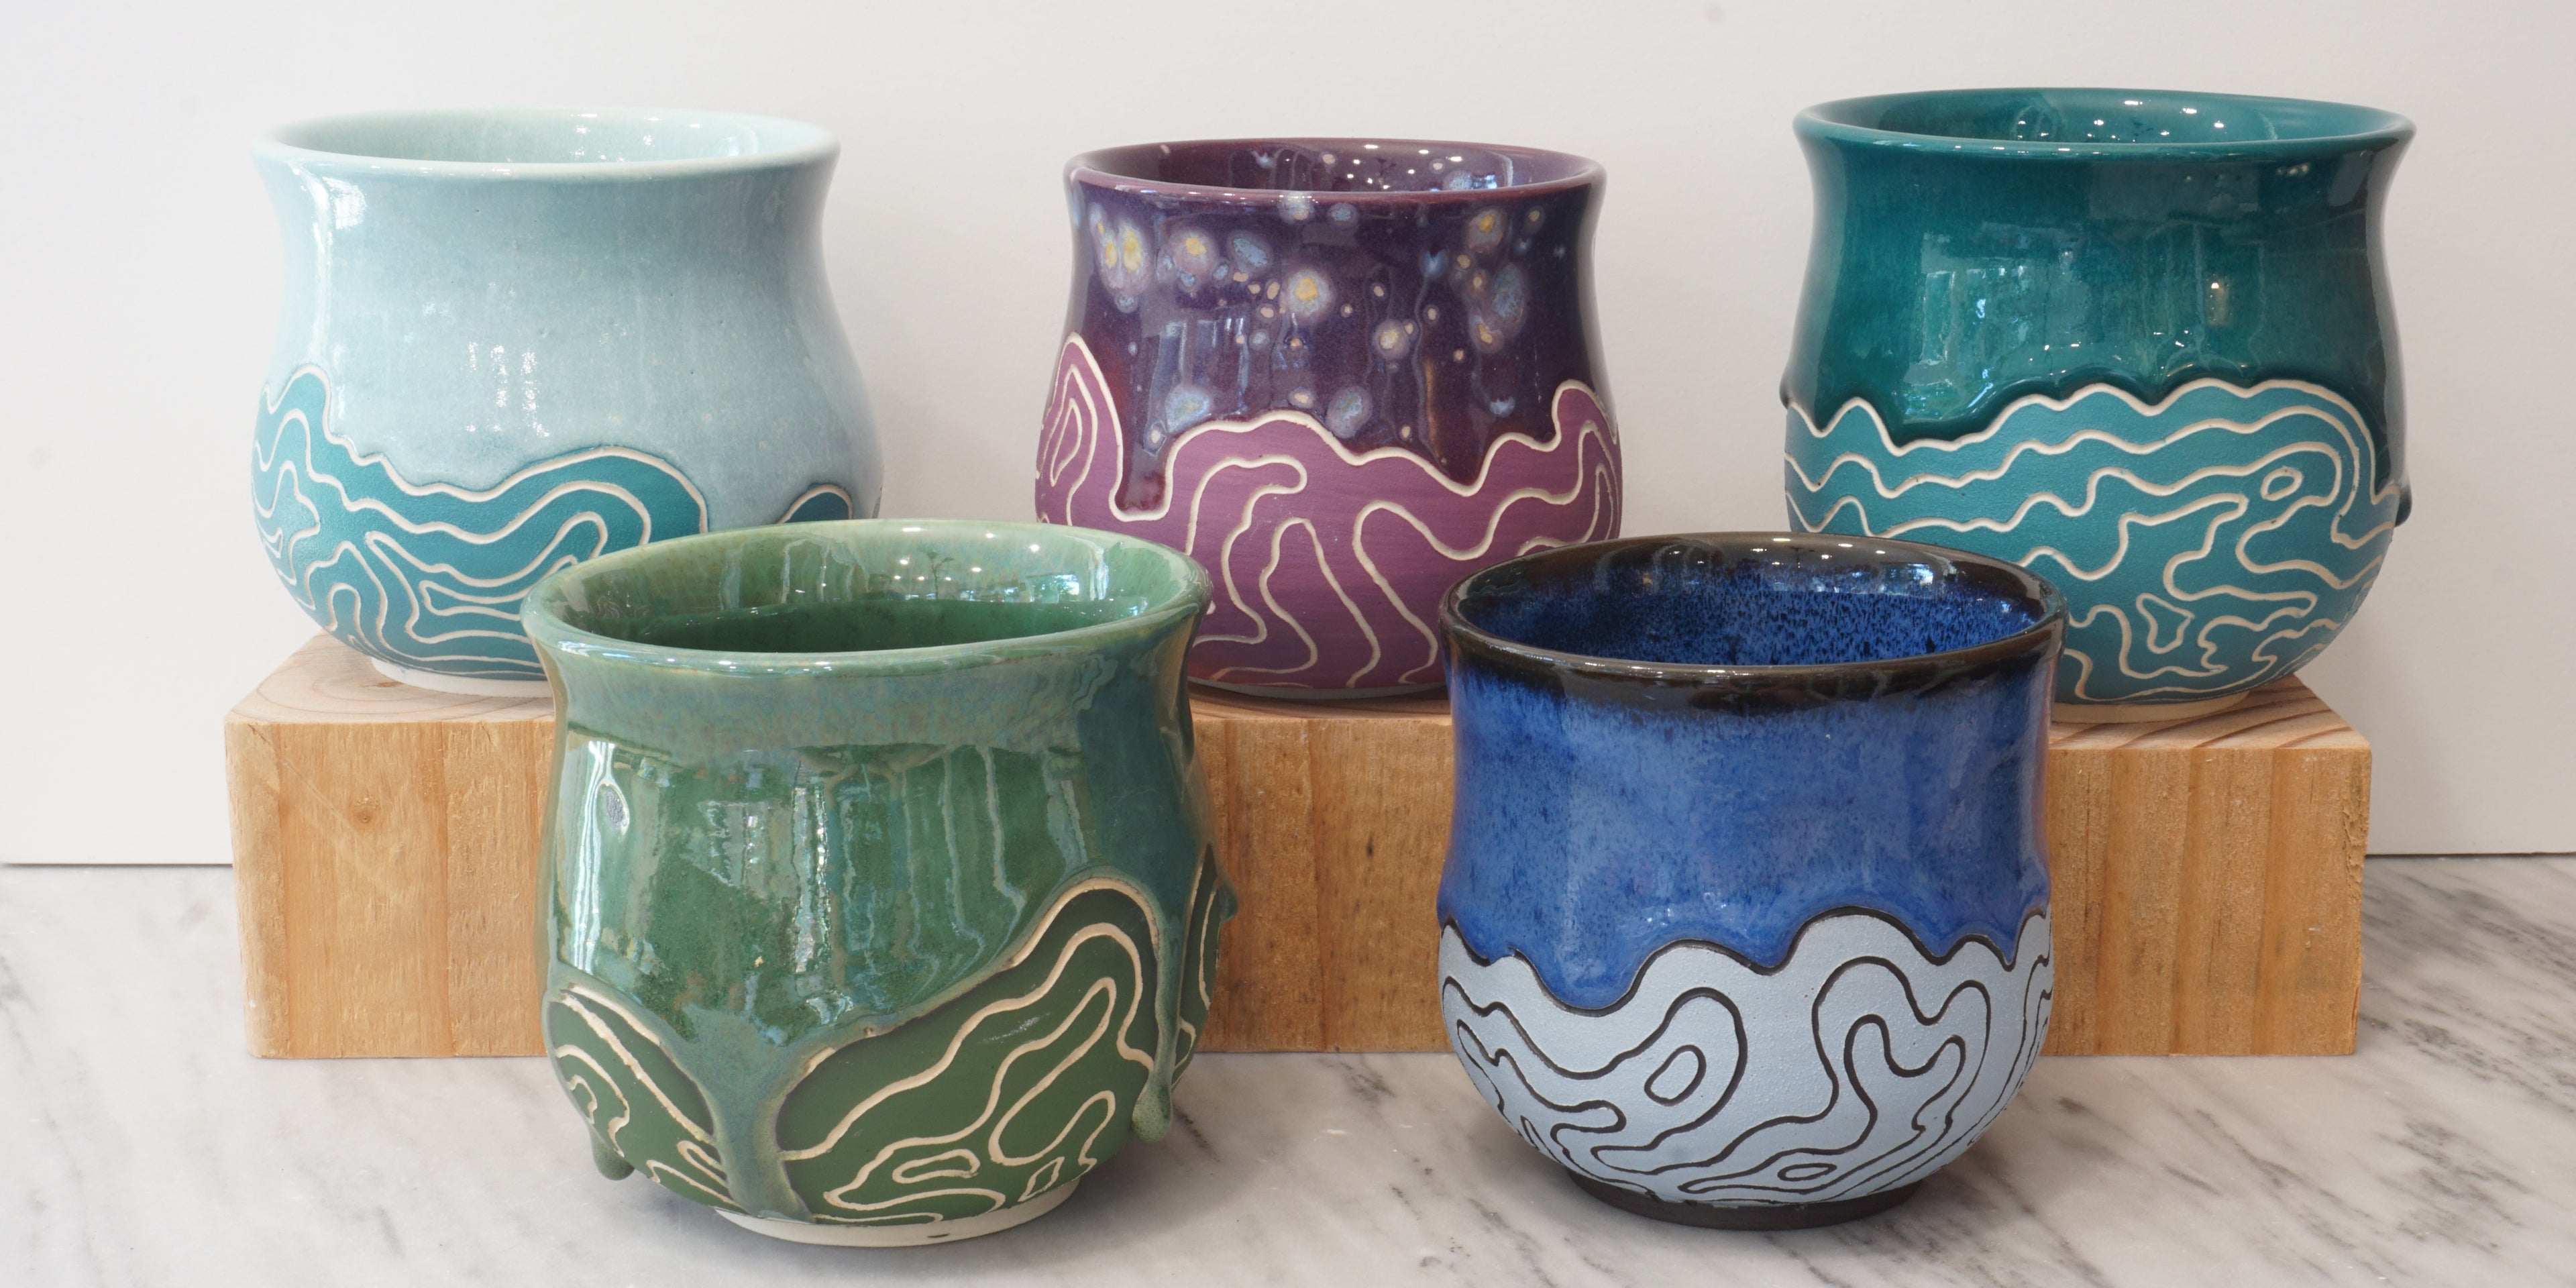 Image showing five brightly colored handmade mugs featuring a topographic map pattern